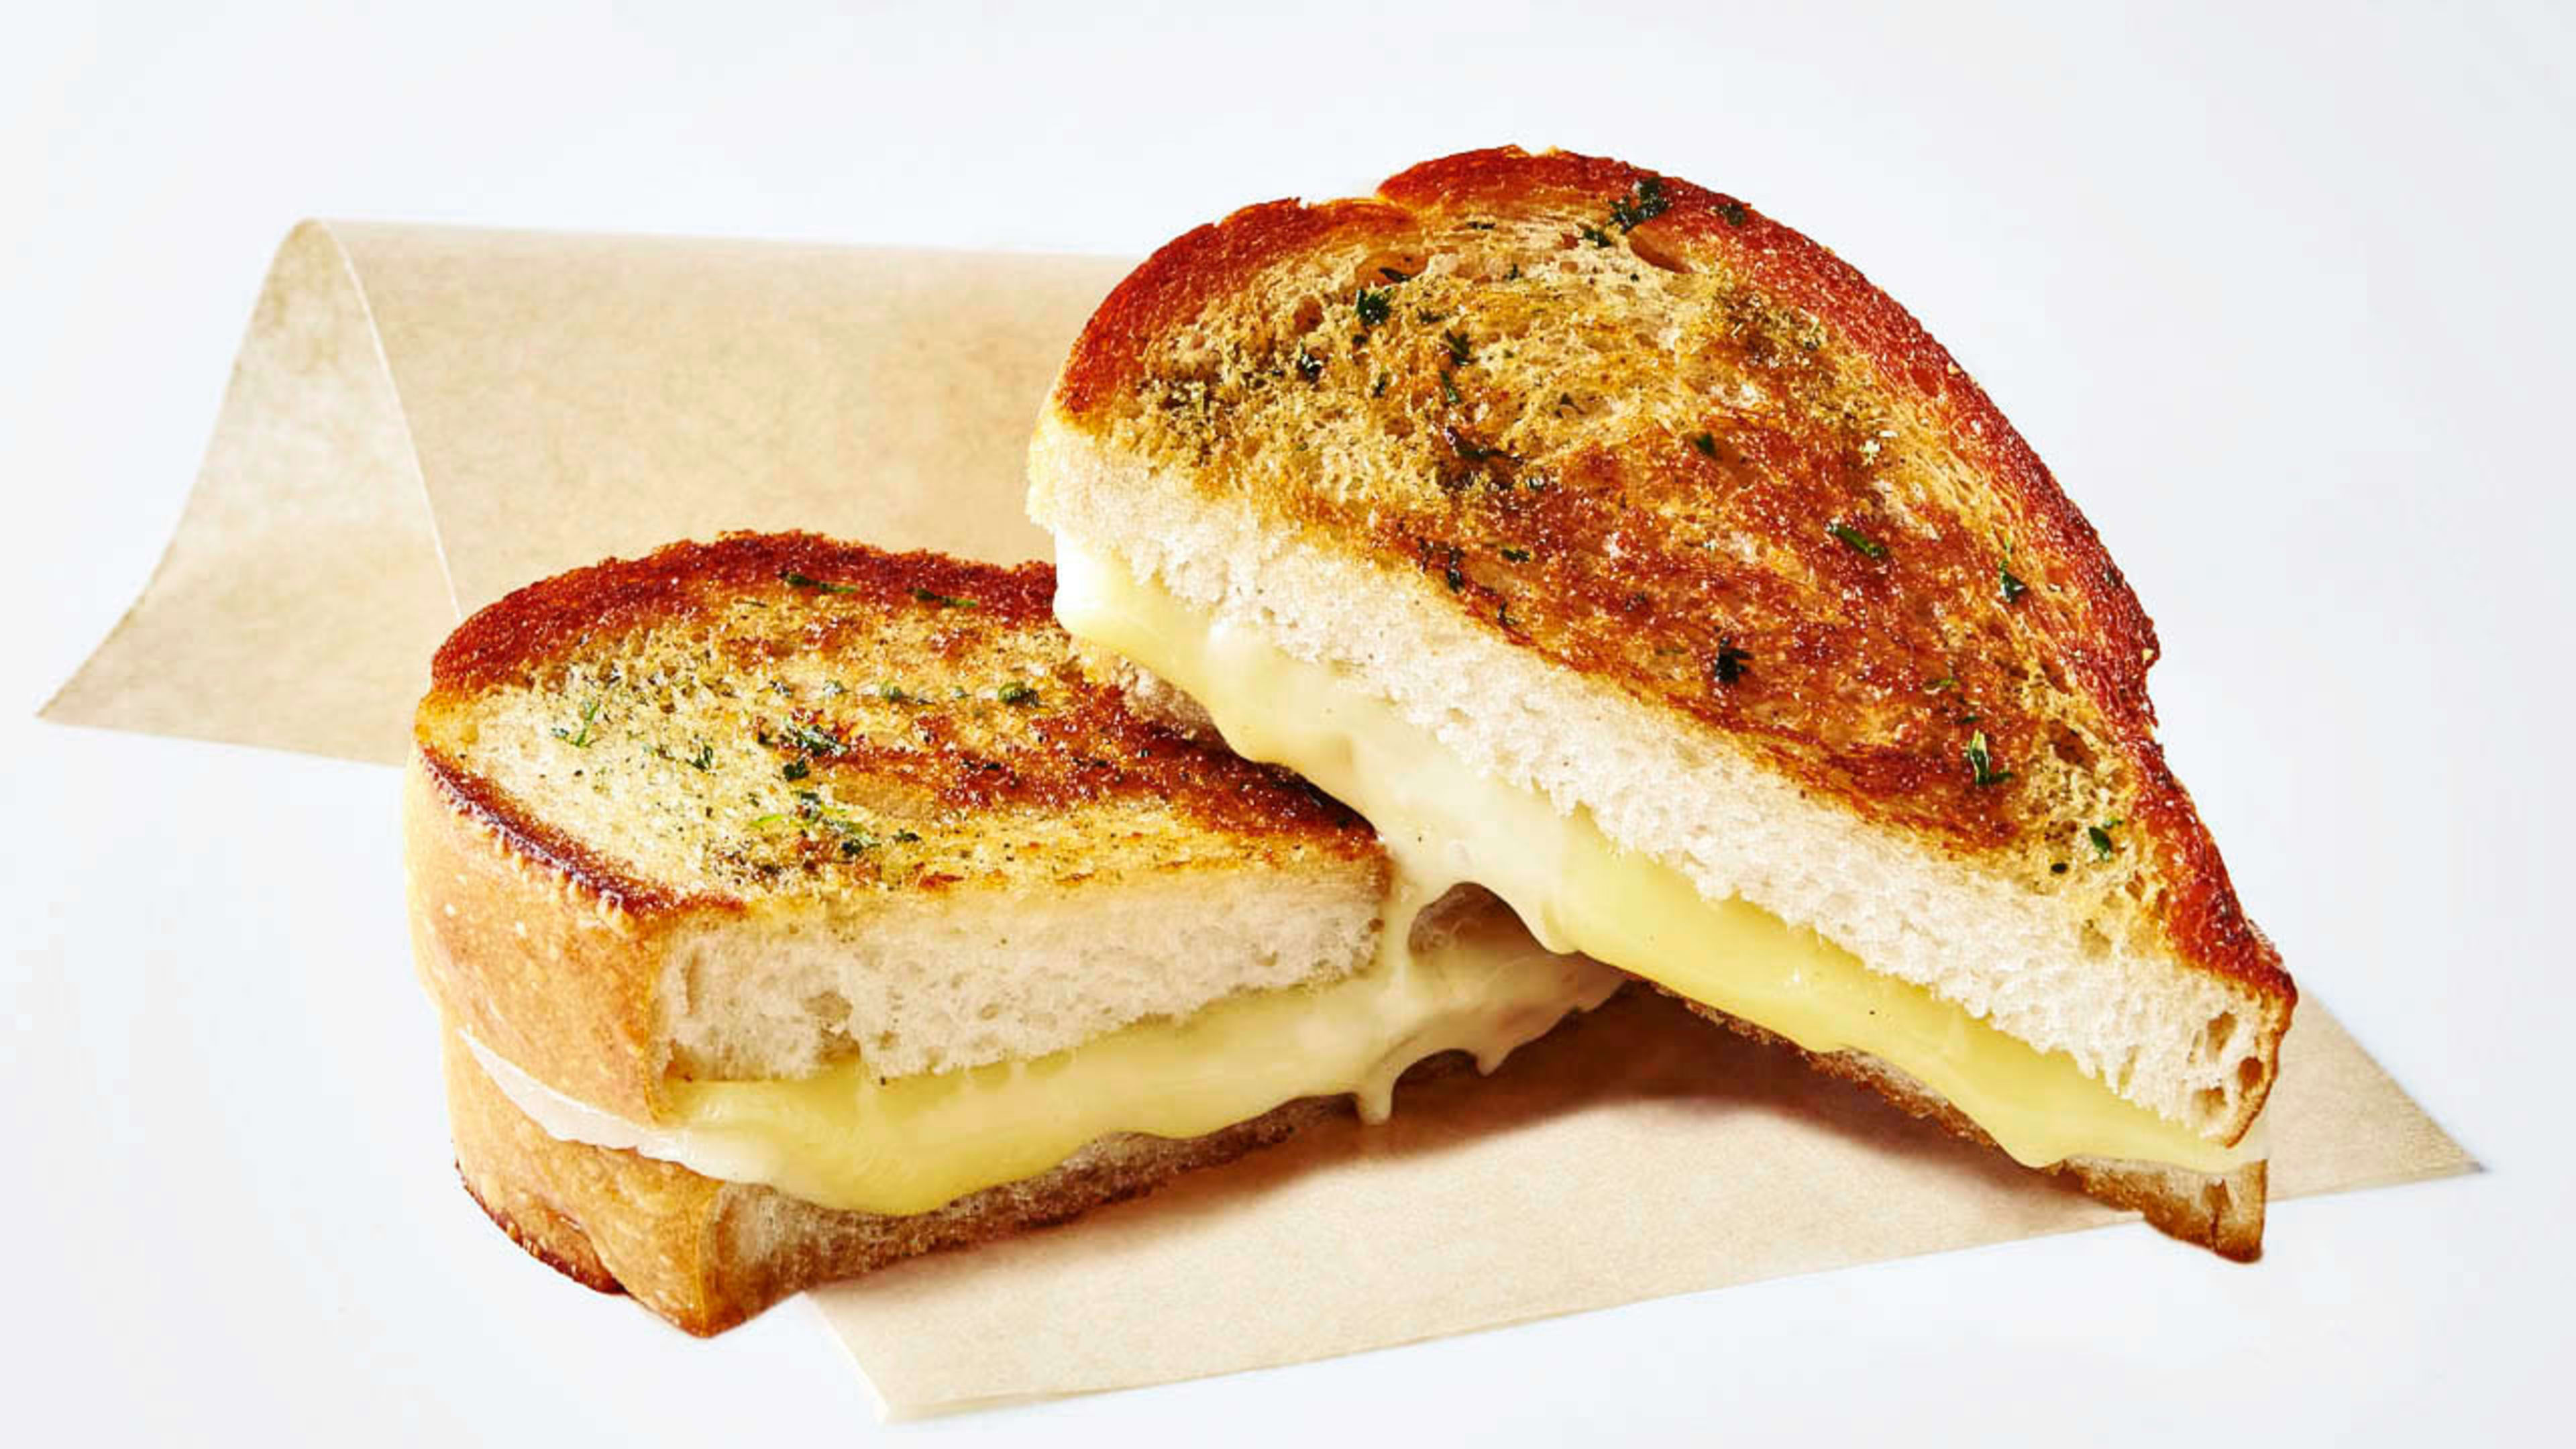 At Last, A Scientific Solution For Delivering Hot Grilled Cheese Sandwiches